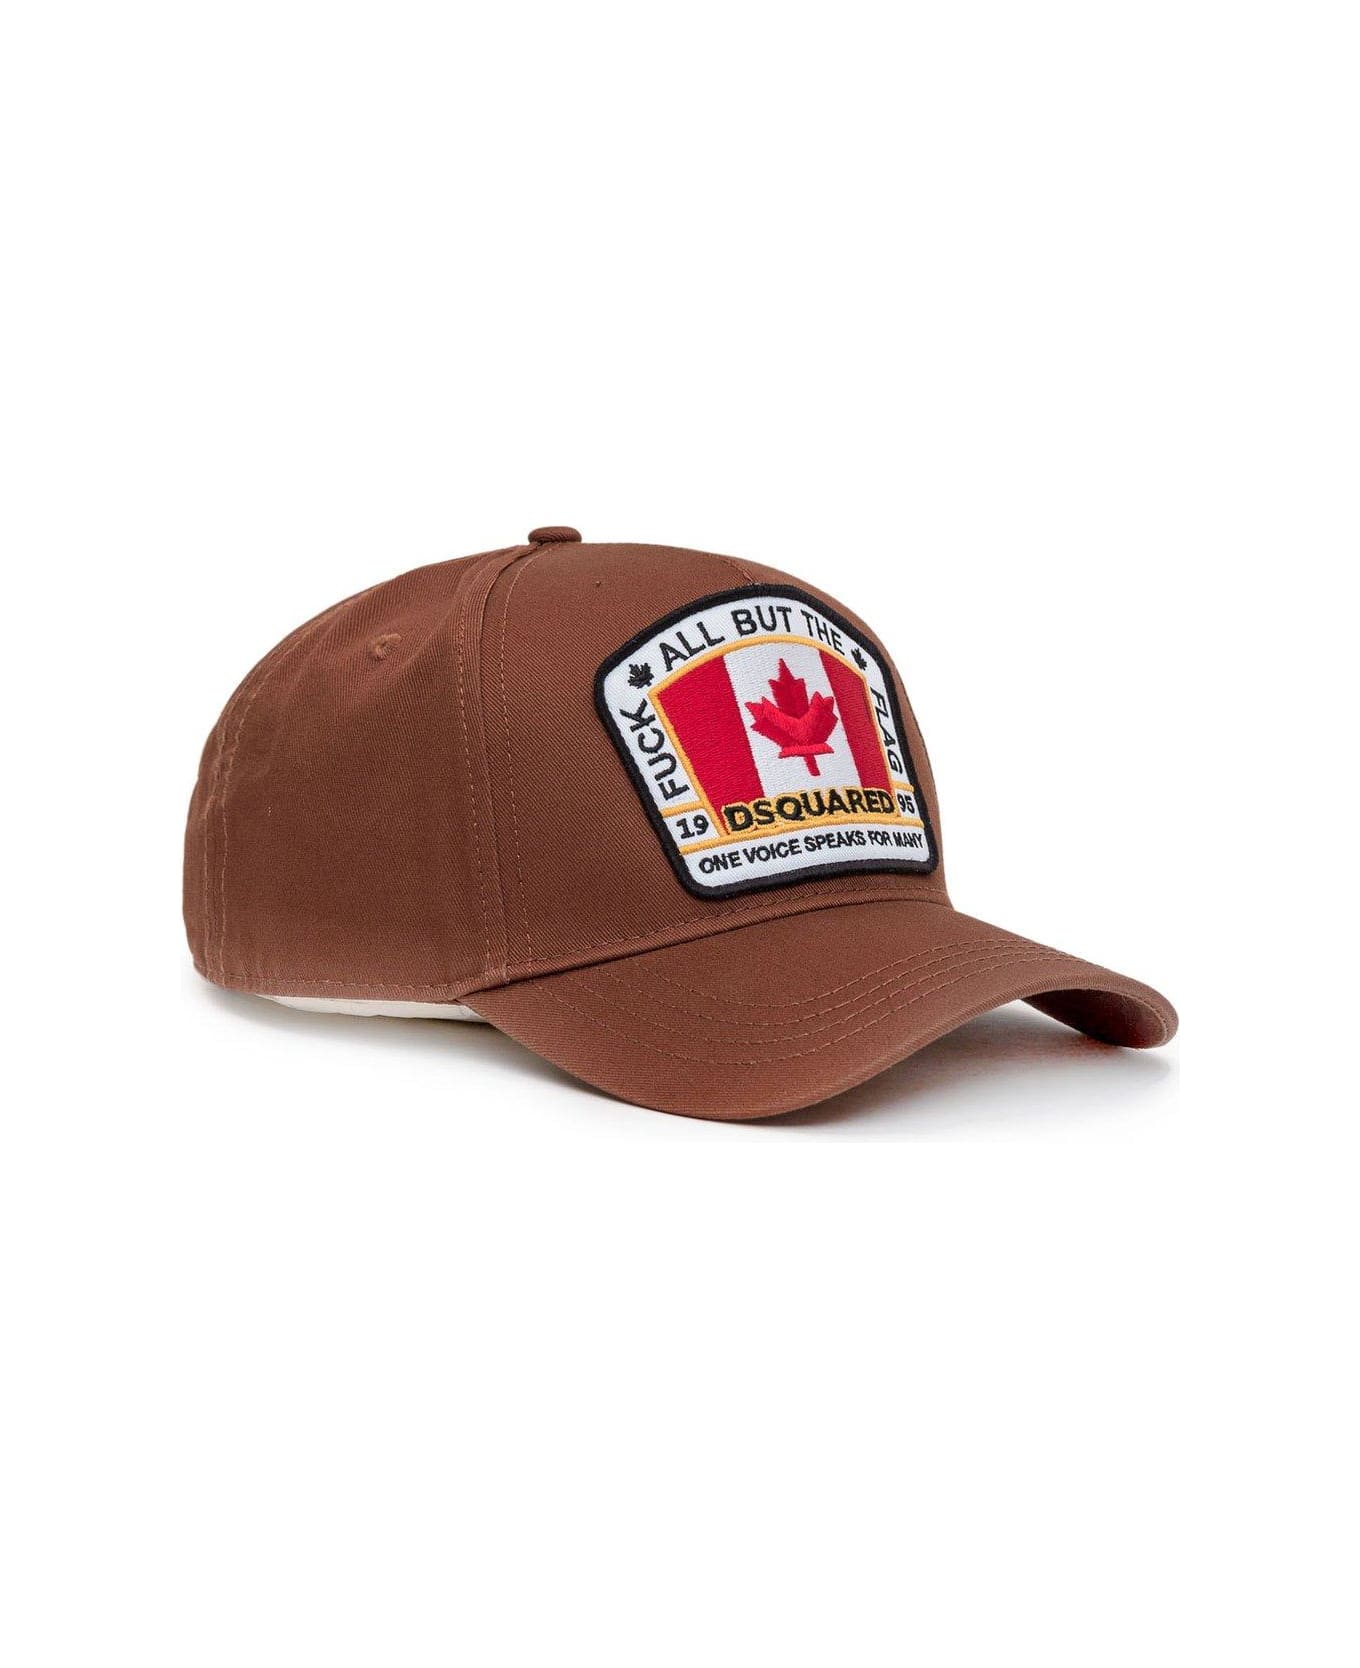 Dsquared2 Flag Patch Baseball Cap - Brown